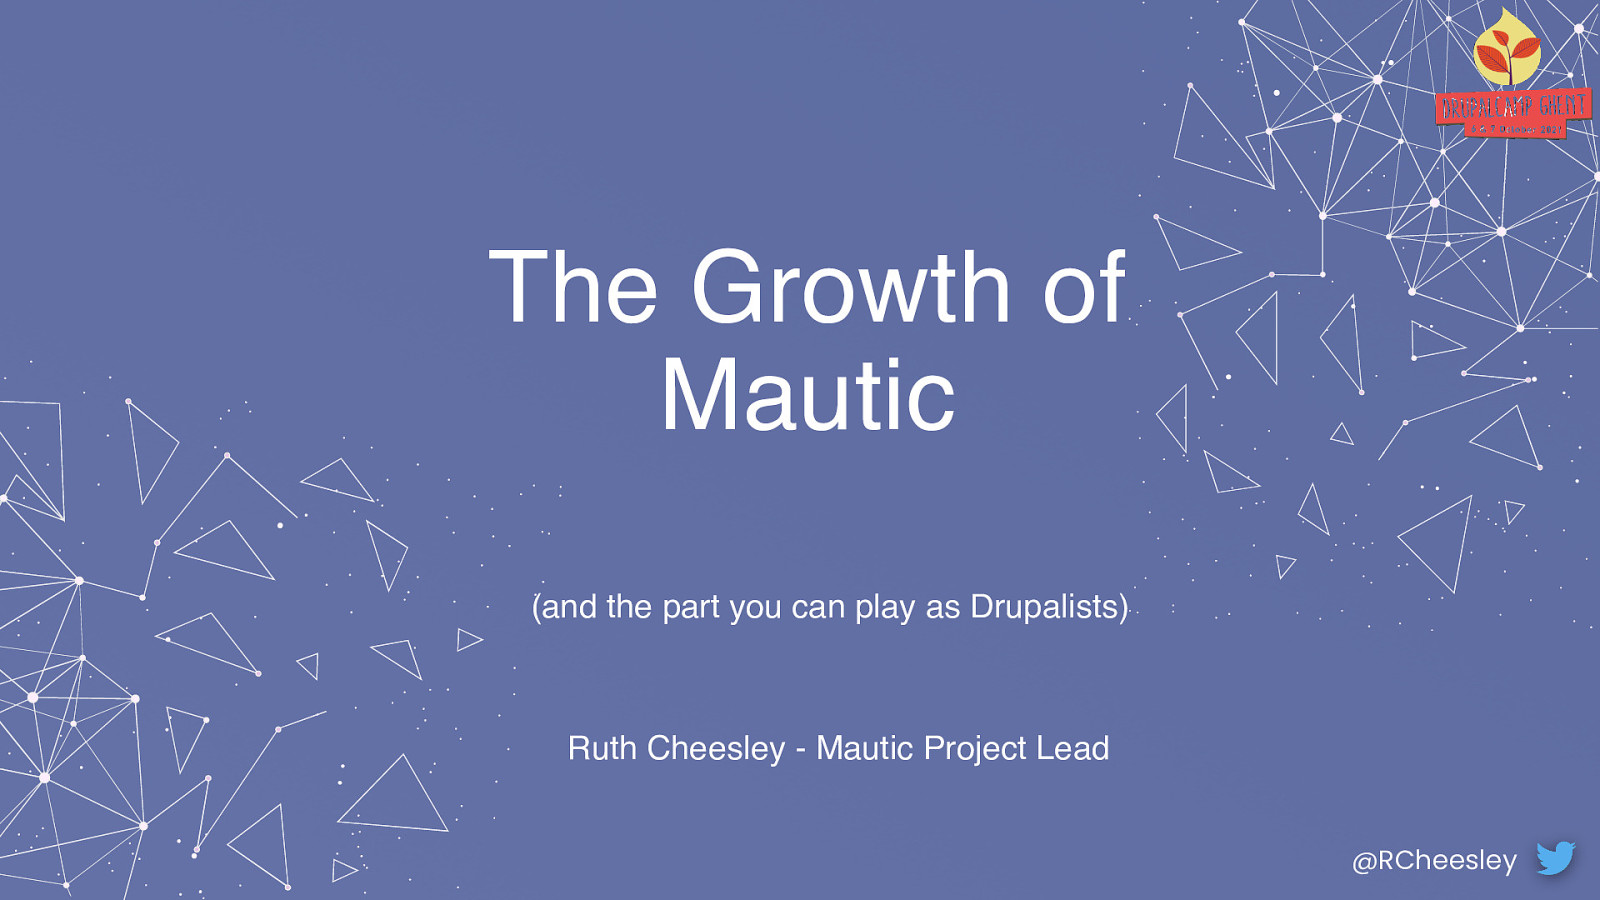 The Growth of Mautic (and the part you can play as Drupalists)